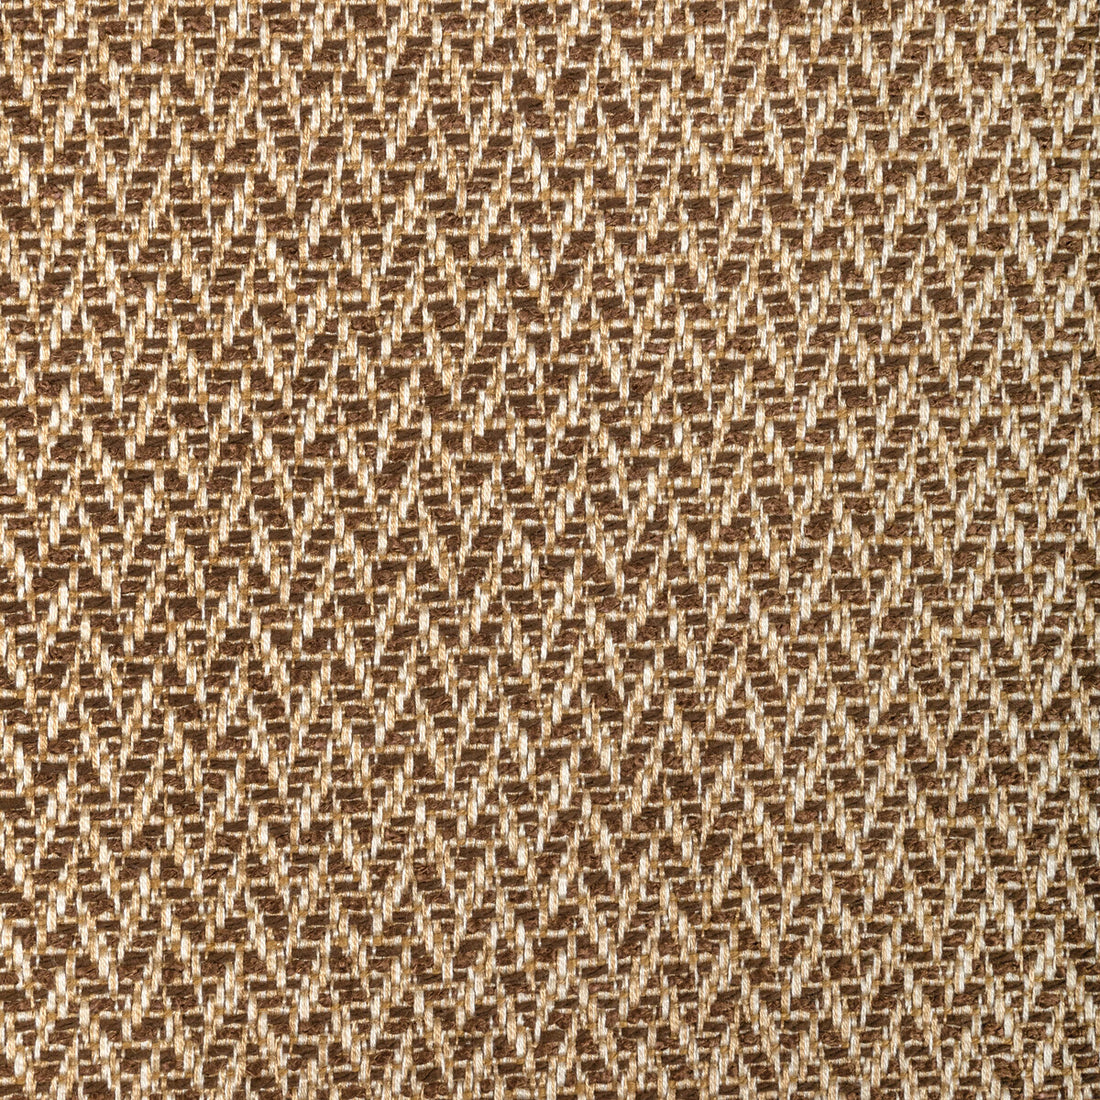 Kravet Design fabric in 36418-6 color - pattern 36418.6.0 - by Kravet Design in the Performance Crypton Home collection